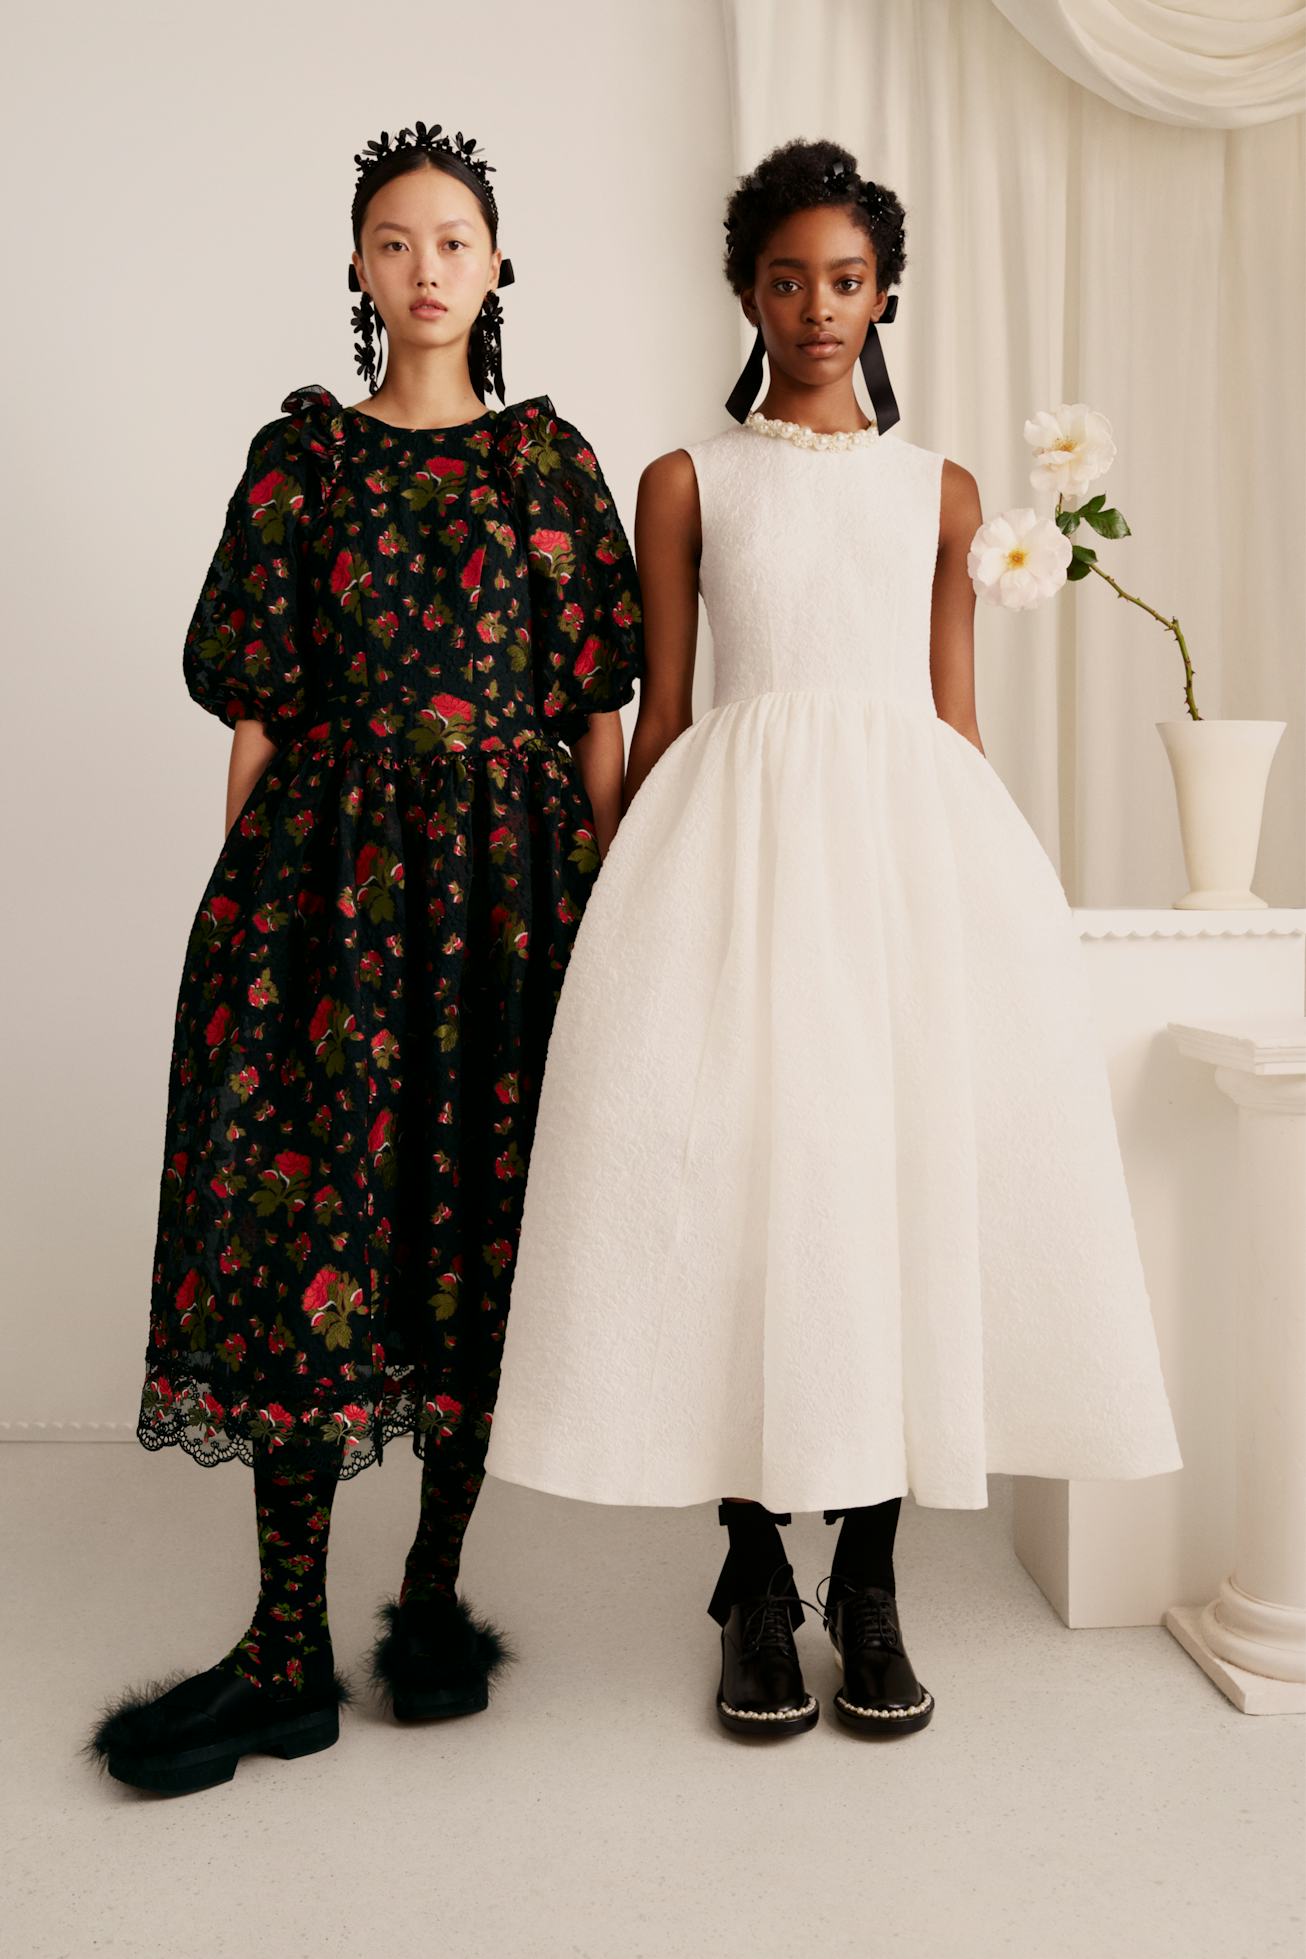 Simone Rocha x H&M Reveal The Lookbook For Their Upcoming Collab.